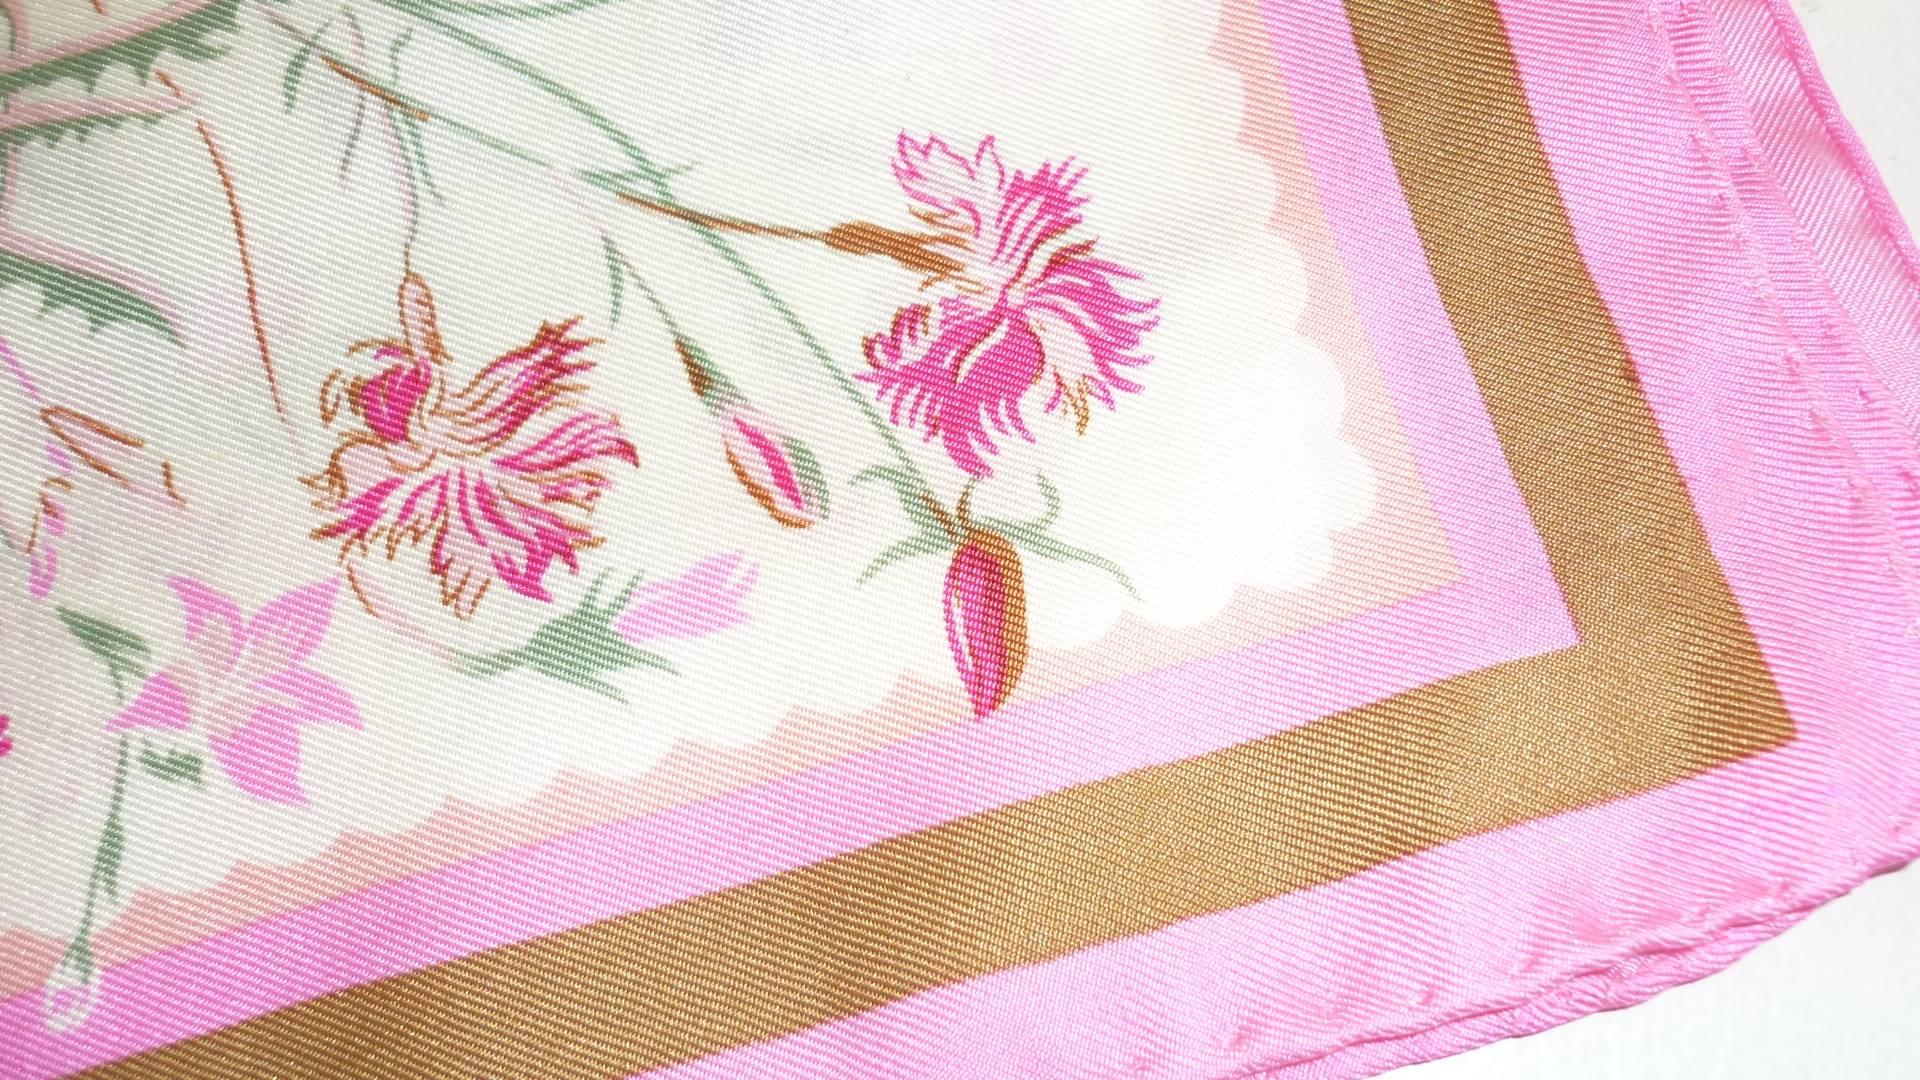 Very nice plant and abstract design silk scarf, with the predominant colors being pink, sage and white.

The dges are rolled and the care tag intact.

There is a small defect on what of the borders (photo), and this is reflected in the price.